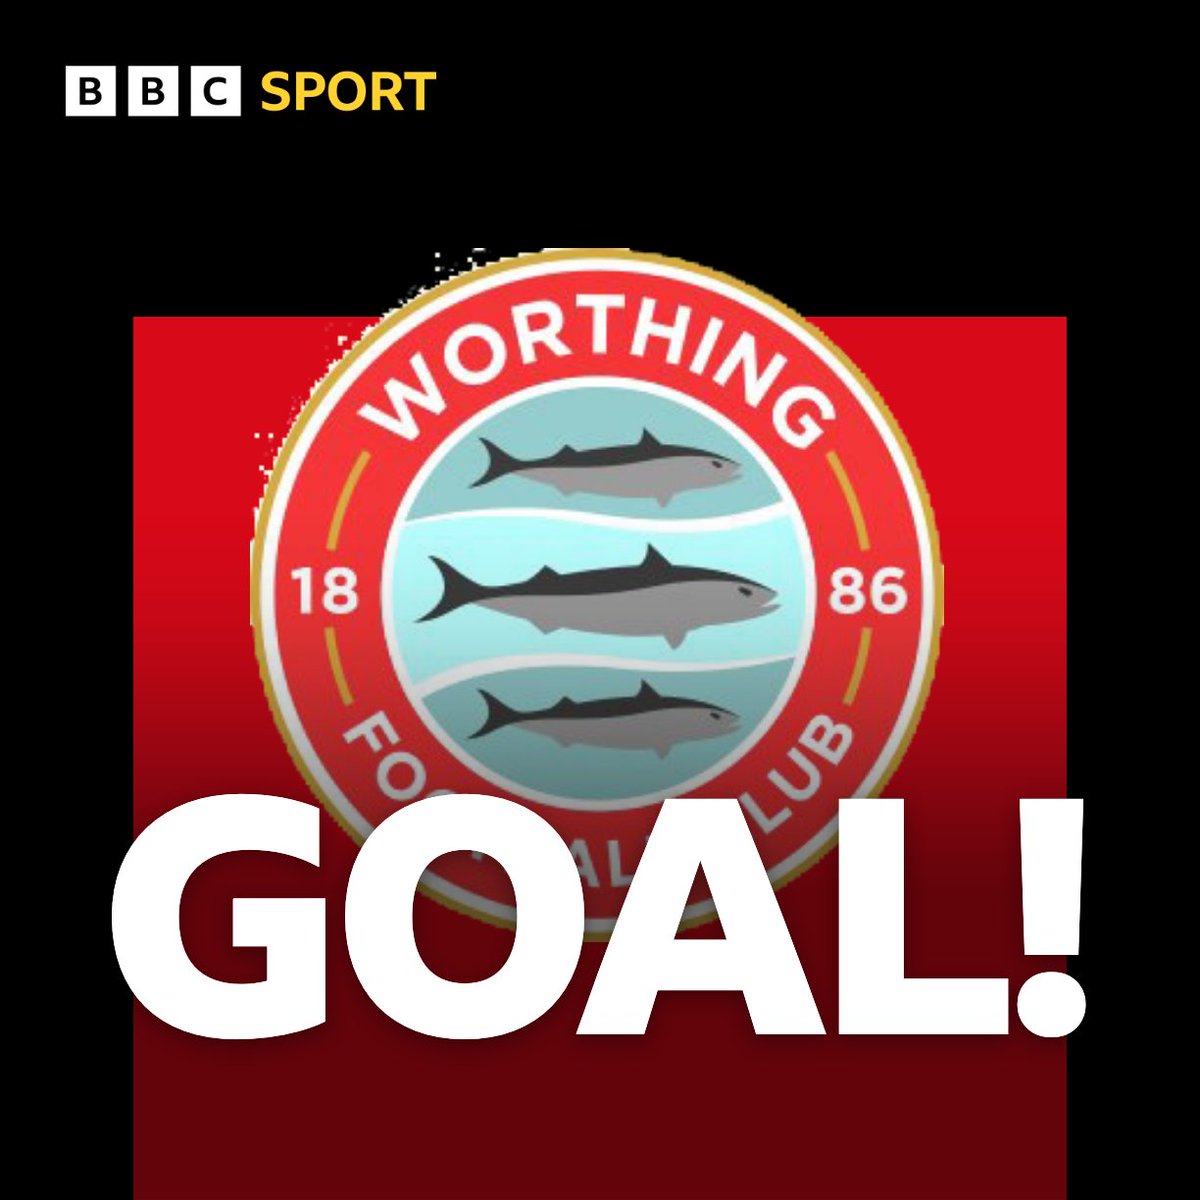 GOALLLL! Worthing 1-1 Braintree Town ❤️ That man Ollie Pearce, No.43 of the season... 🤩 Back in the game. 🔥 Live updates on @BBCSussex! 📻